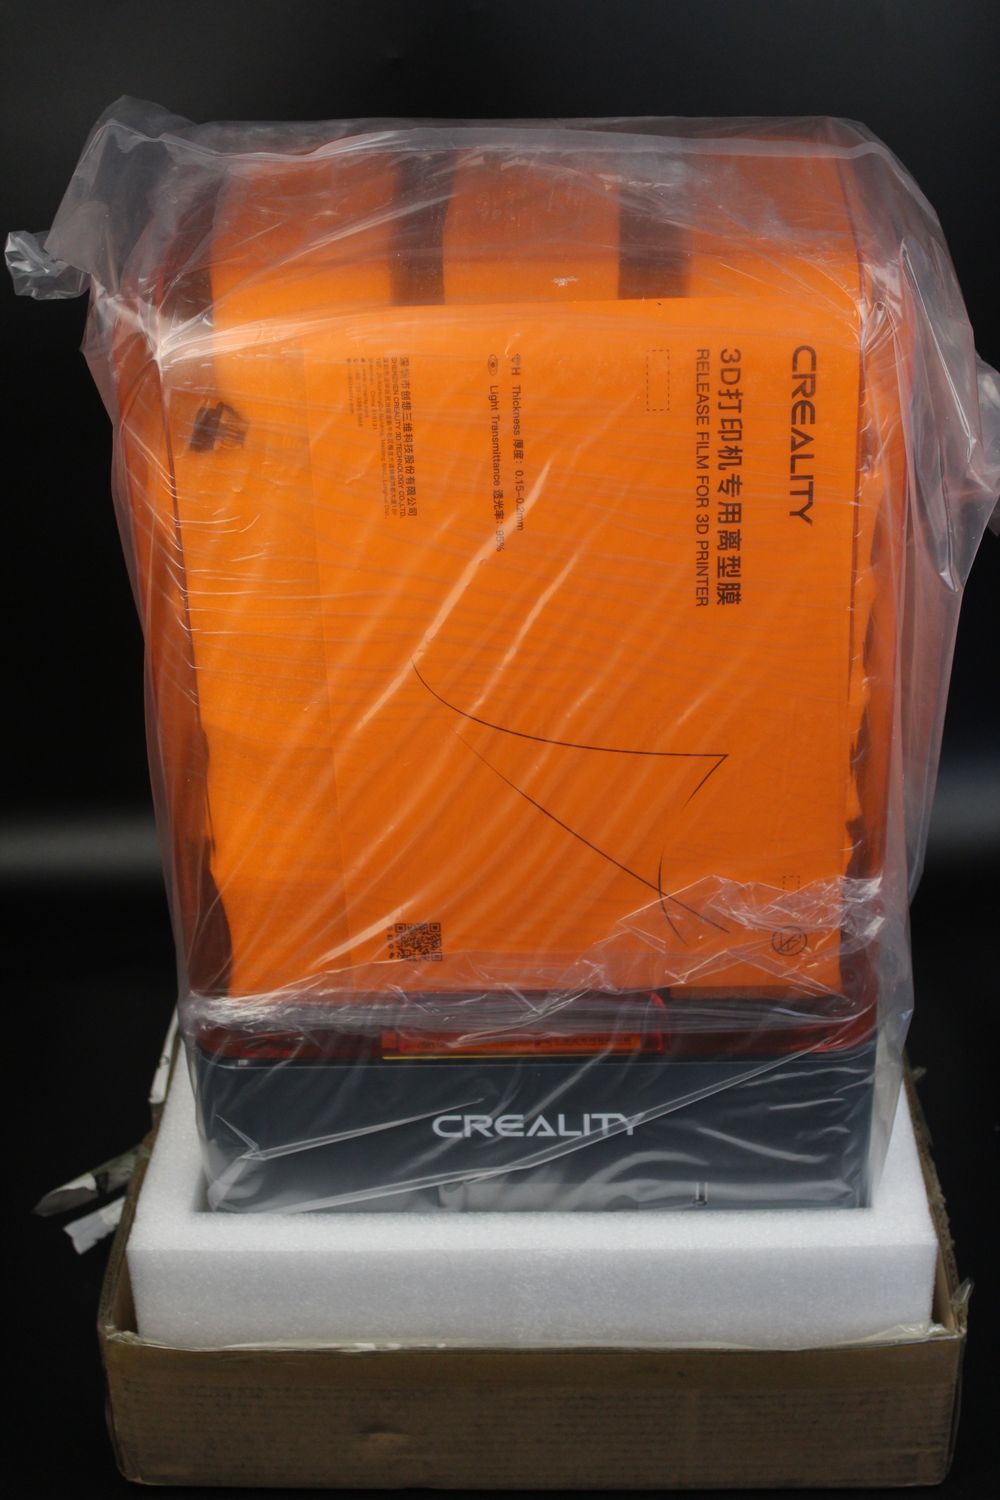 Creality Halot Mage Pro Review Packaging2 | Creality Halot Mage Pro Review: Great Prints, Bad Software